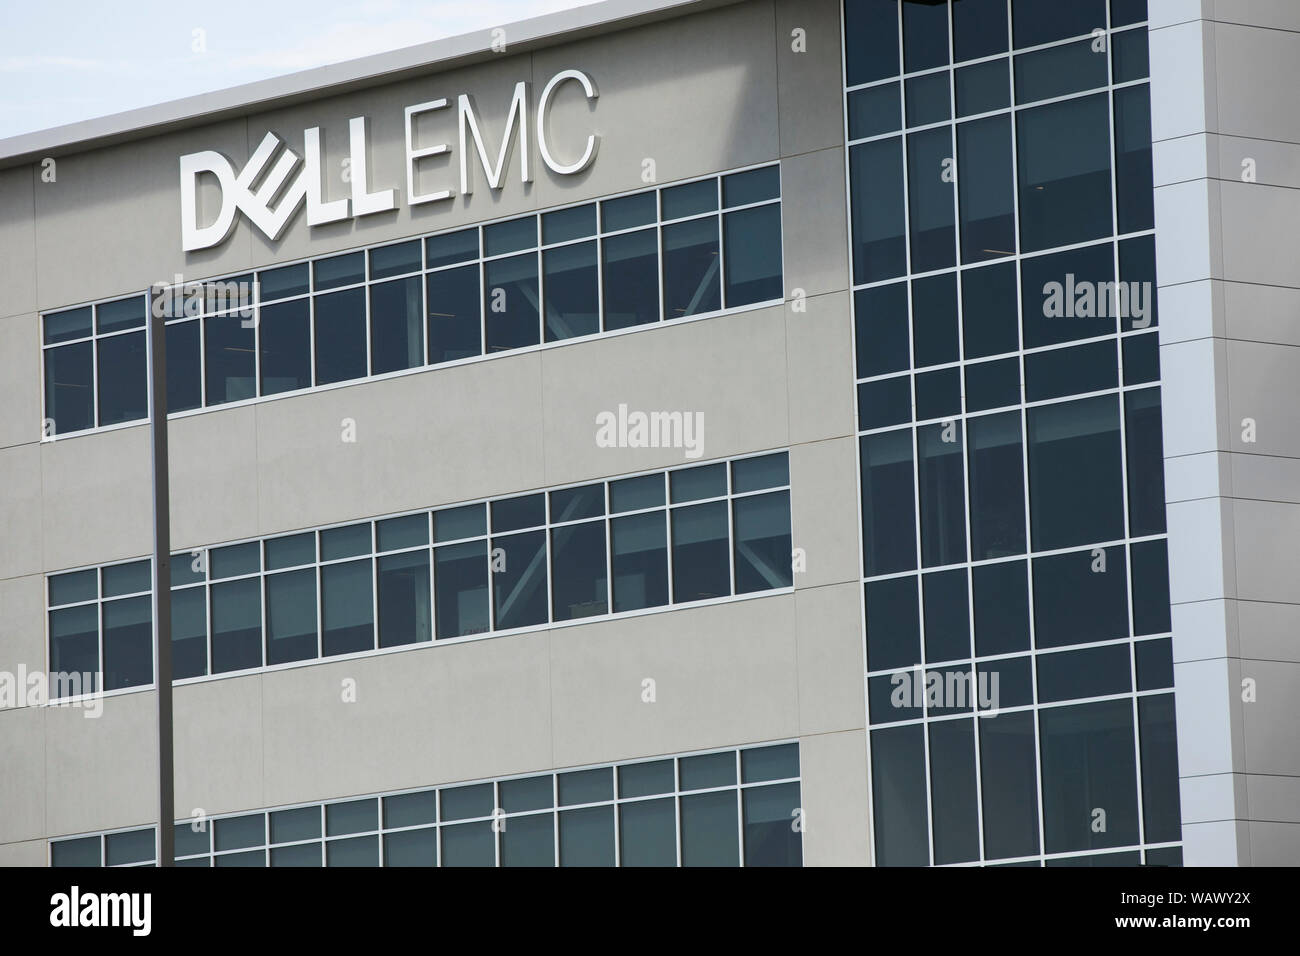 A logo sign outside of a facility occupied by Dell EMC in Draper, Utah on July 27, 2019. Stock Photo